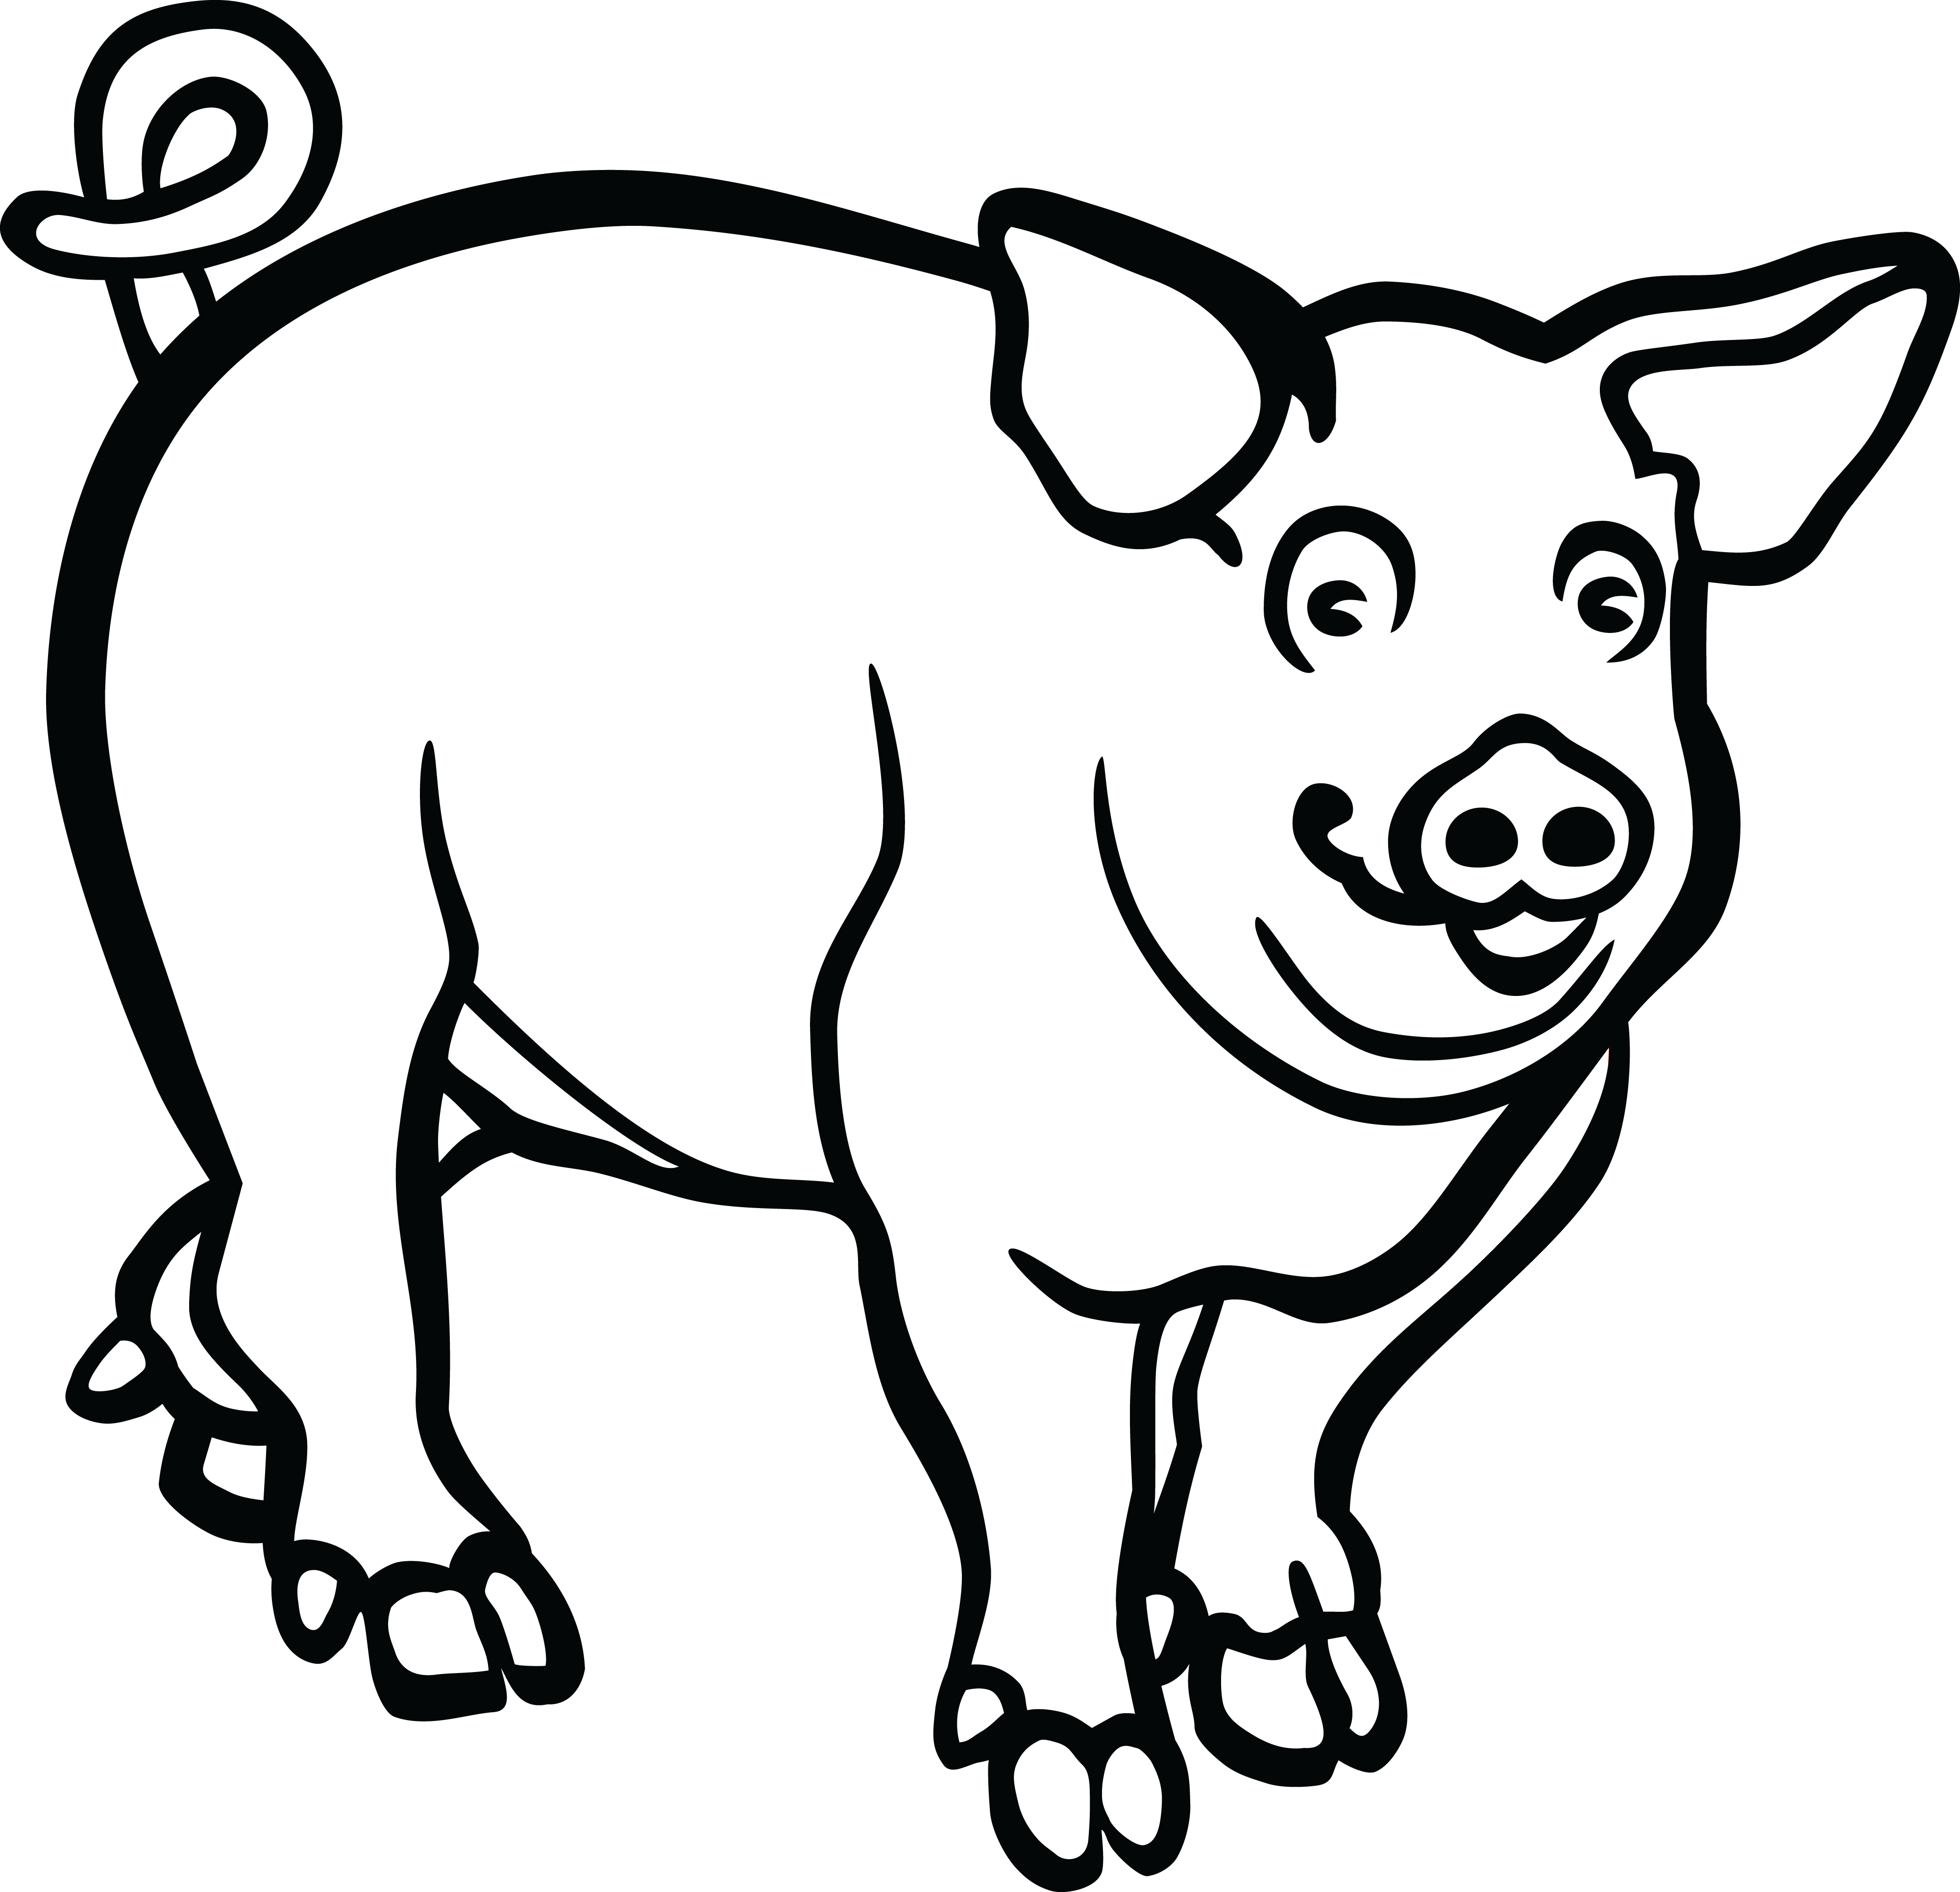 Pigs clipart black and white, Pigs black and white.